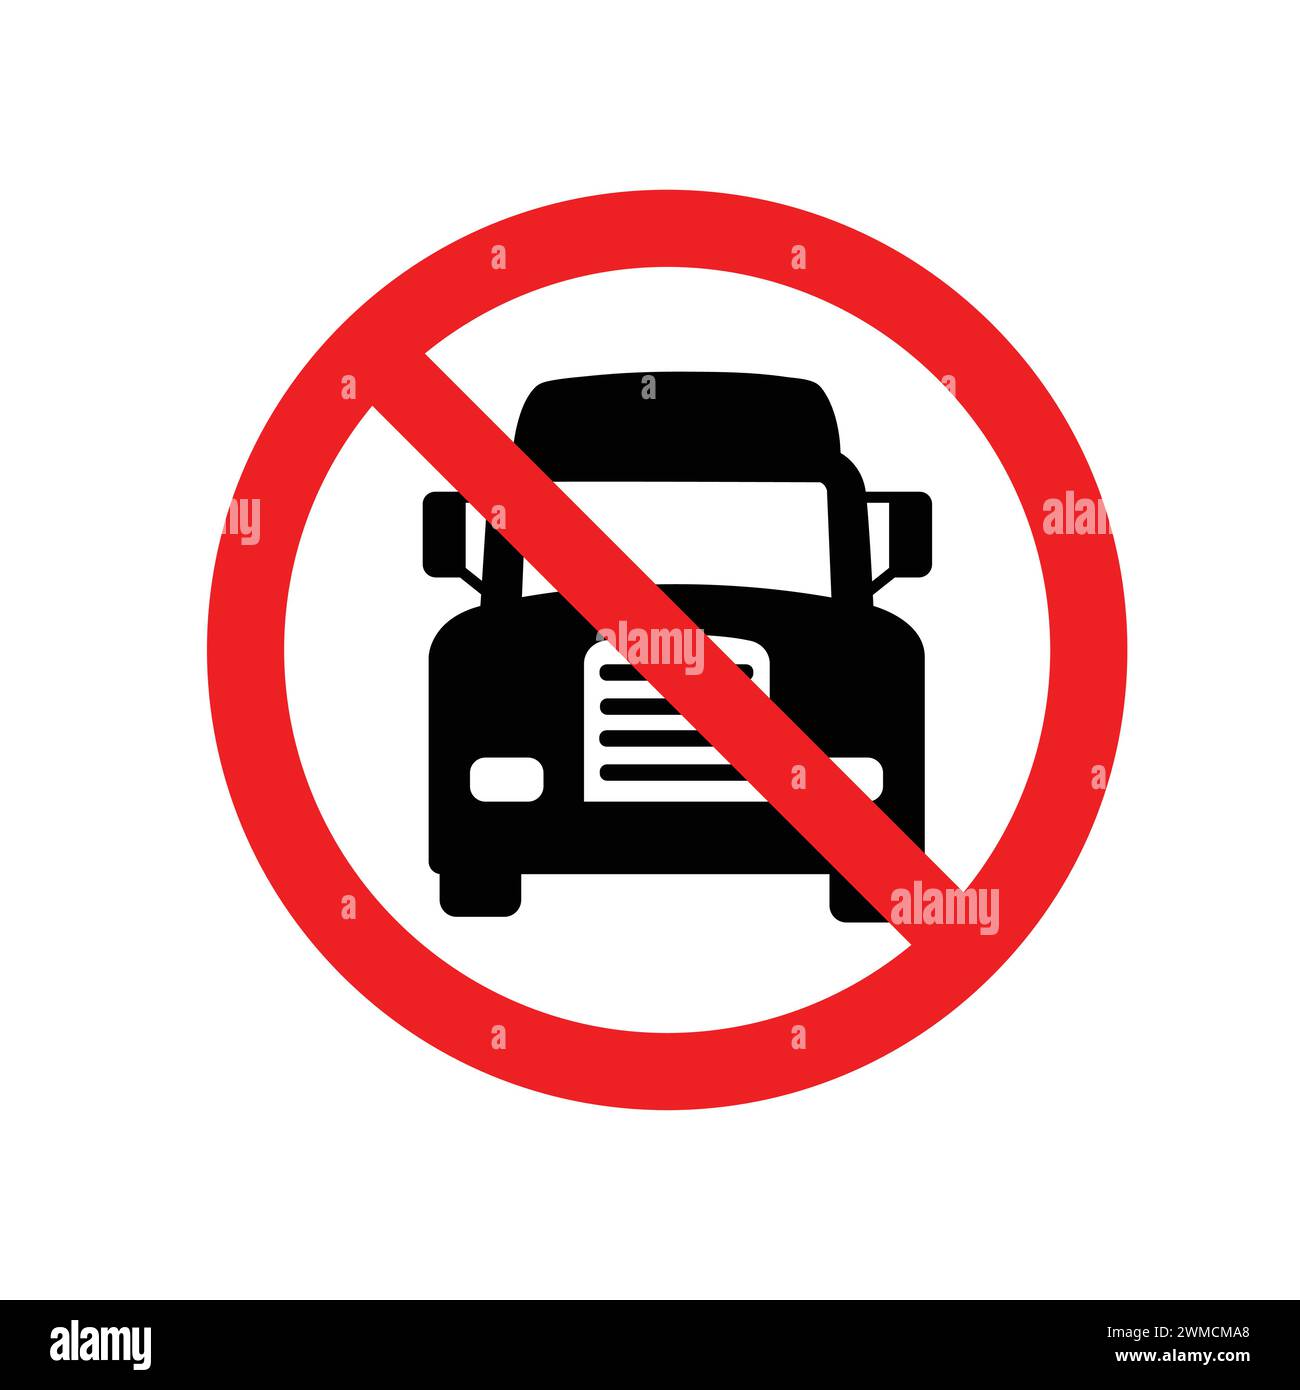 No Truck Allowed Sign. No Trucks Sign Or No Parking Sign. No Lorry Prohibit Icon. Access Forbidden. Attention Icon No E-Truck Road Sign Stock Vector